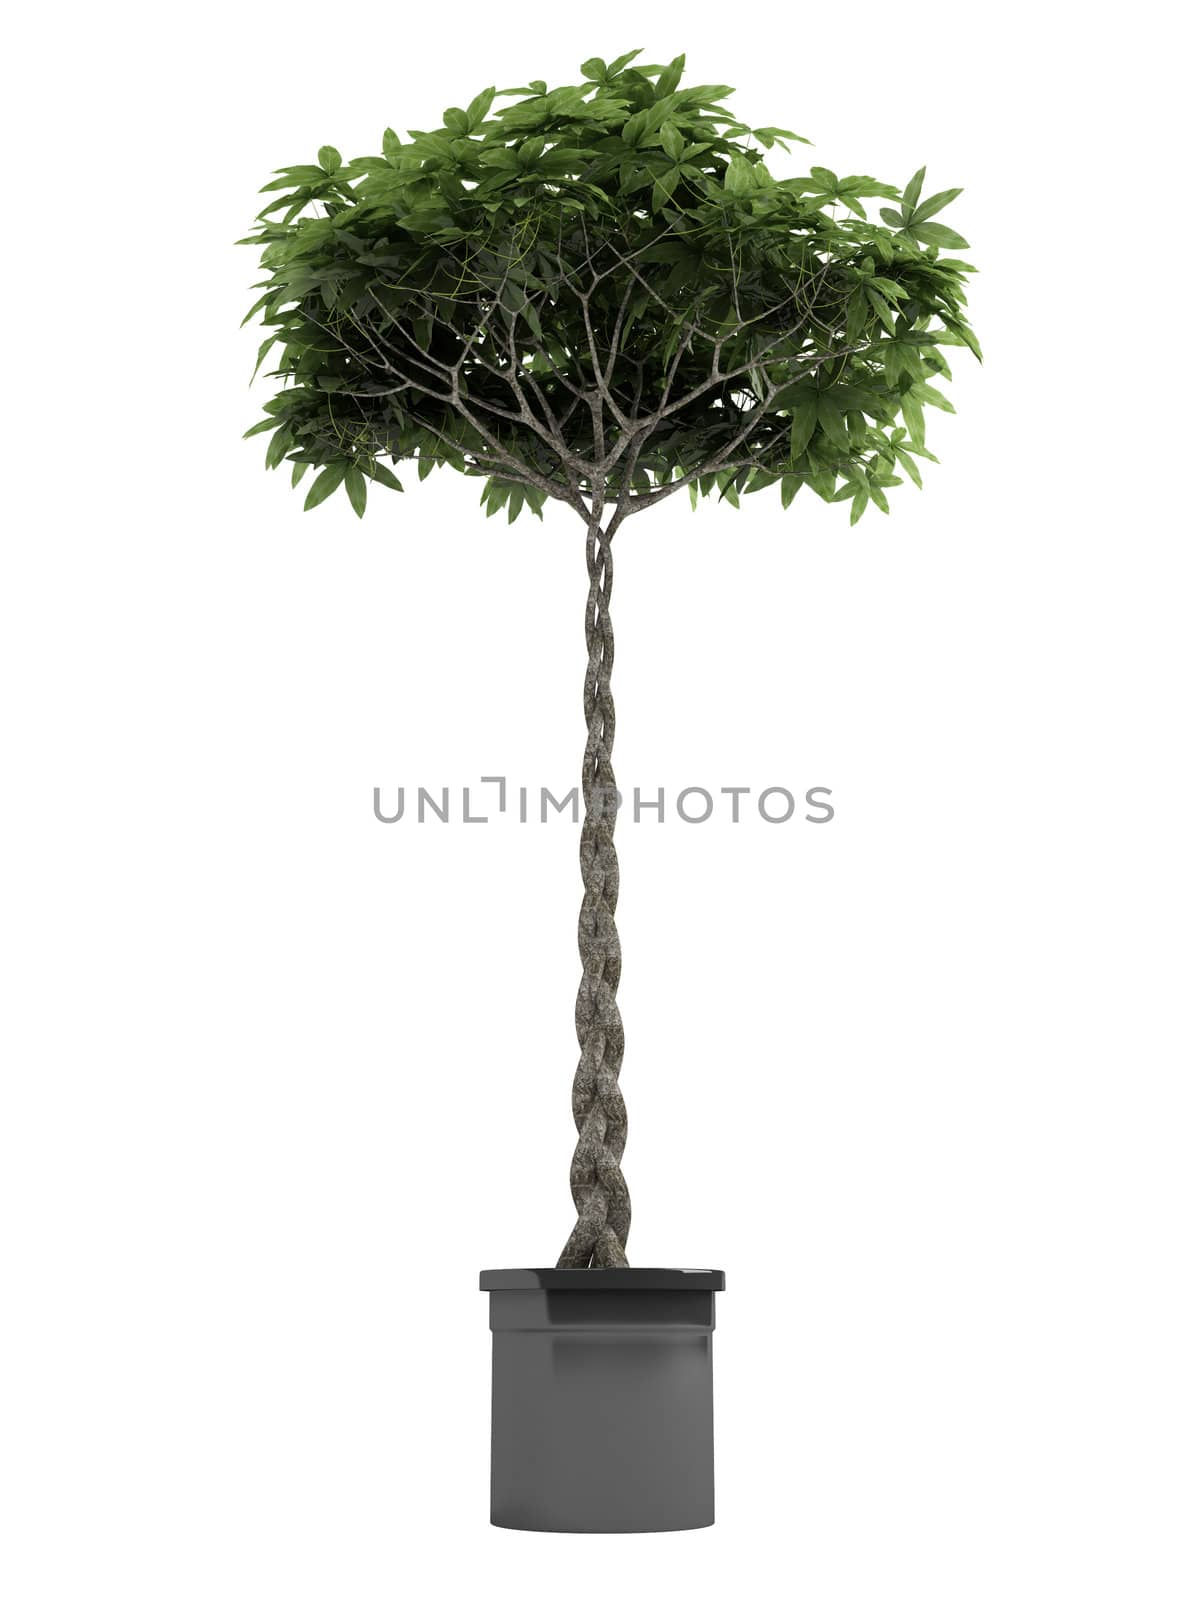 Pachira, otherwise known as the money tree, with a braided stem growing in a container for symbolic good luck in the house or business isolated on white